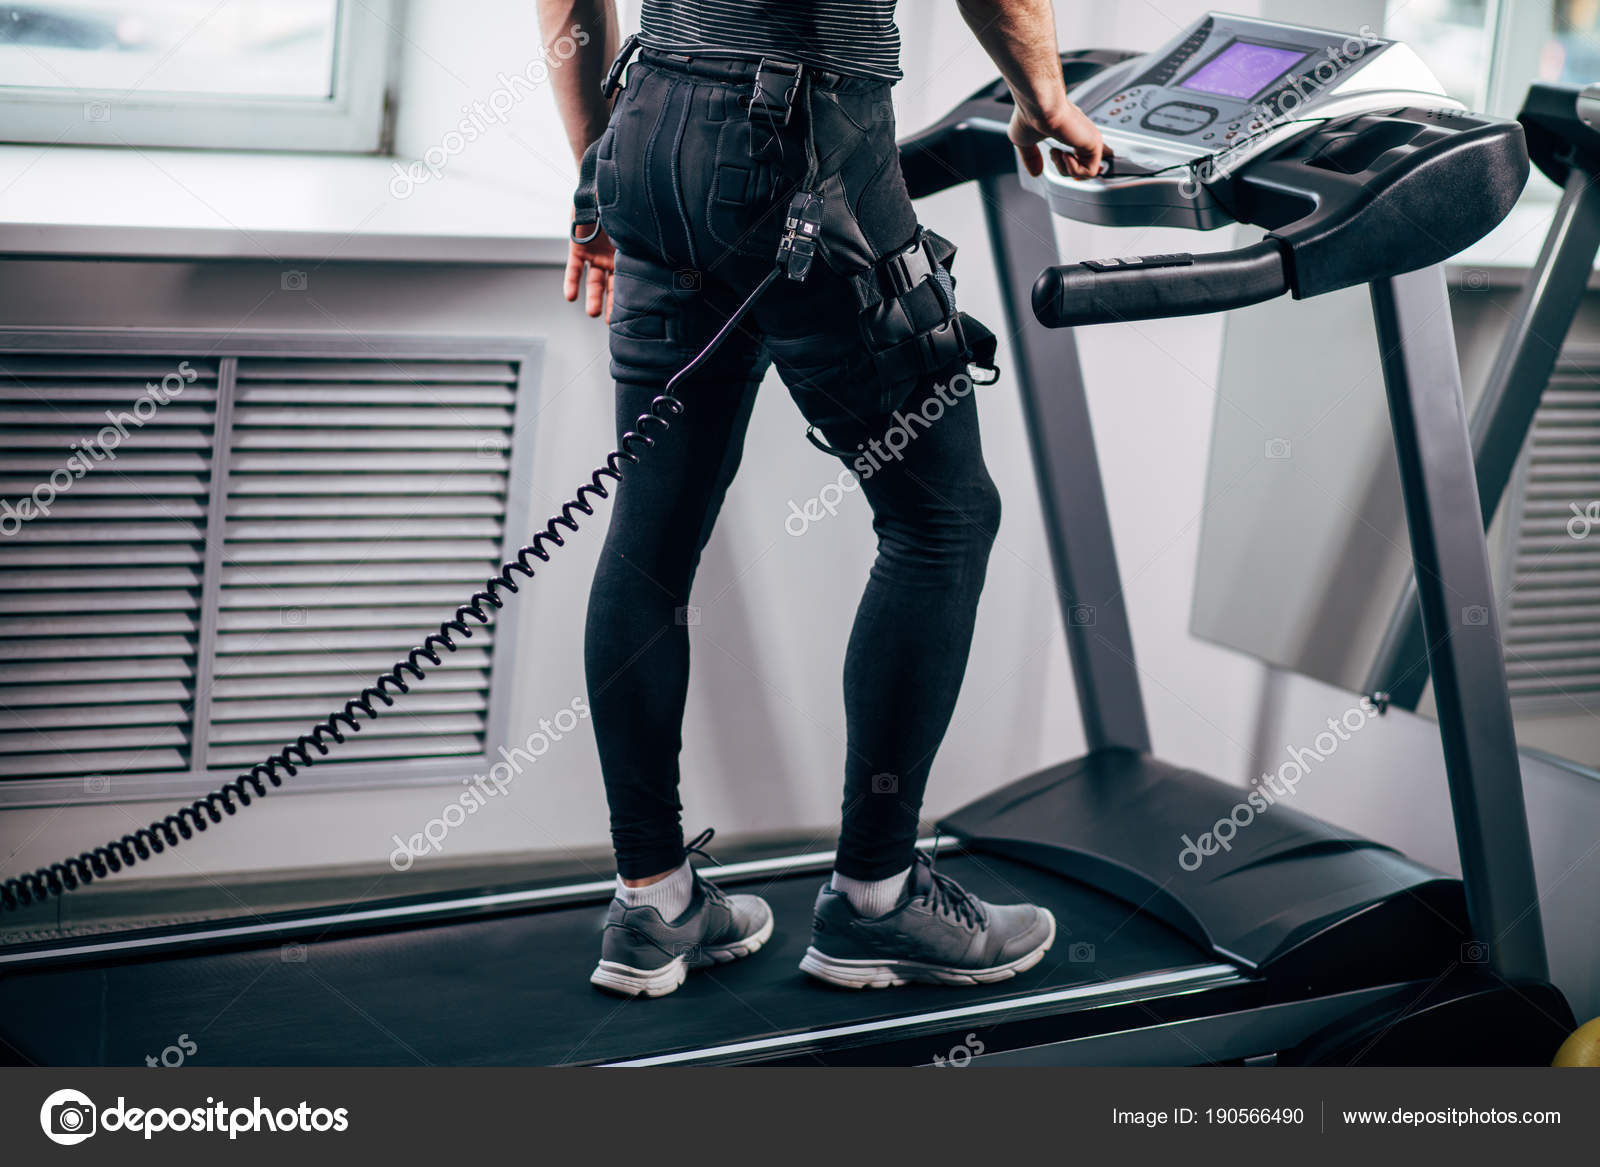 Ems Training Electrical Muscle Stimulation Stock Photo - Download